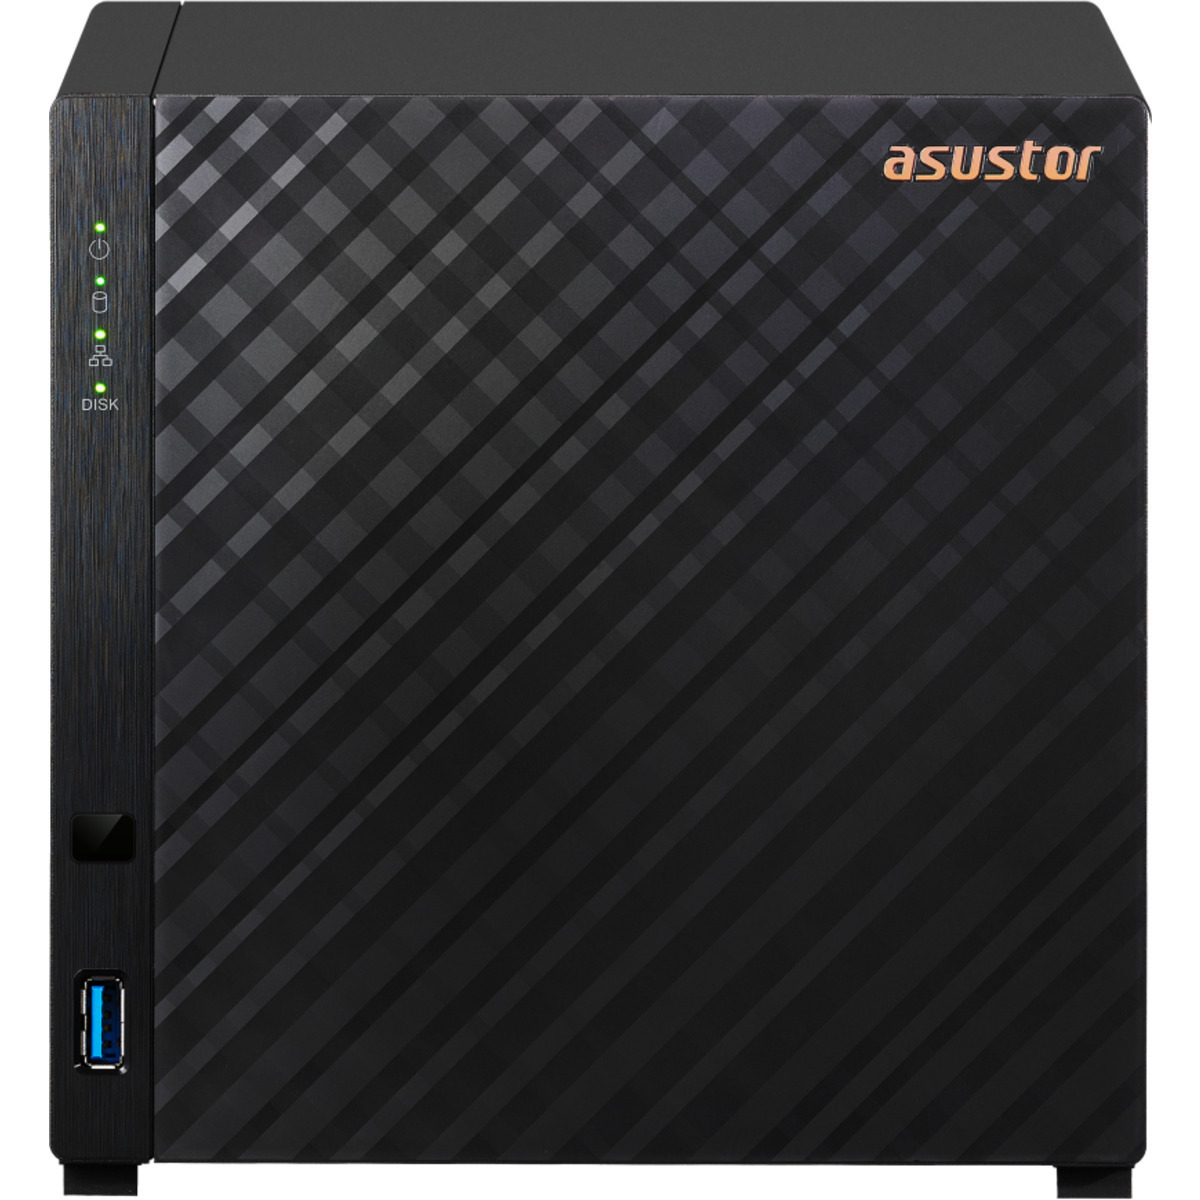 ASUSTOR DRIVESTOR 4 AS1104T 40tb 4-Bay Desktop Personal / Basic Home / Small Office NAS - Network Attached Storage Device 4x10tb Seagate IronWolf ST10000VN000 3.5 7200rpm SATA 6Gb/s HDD NAS Class Drives Installed - Burn-In Tested DRIVESTOR 4 AS1104T